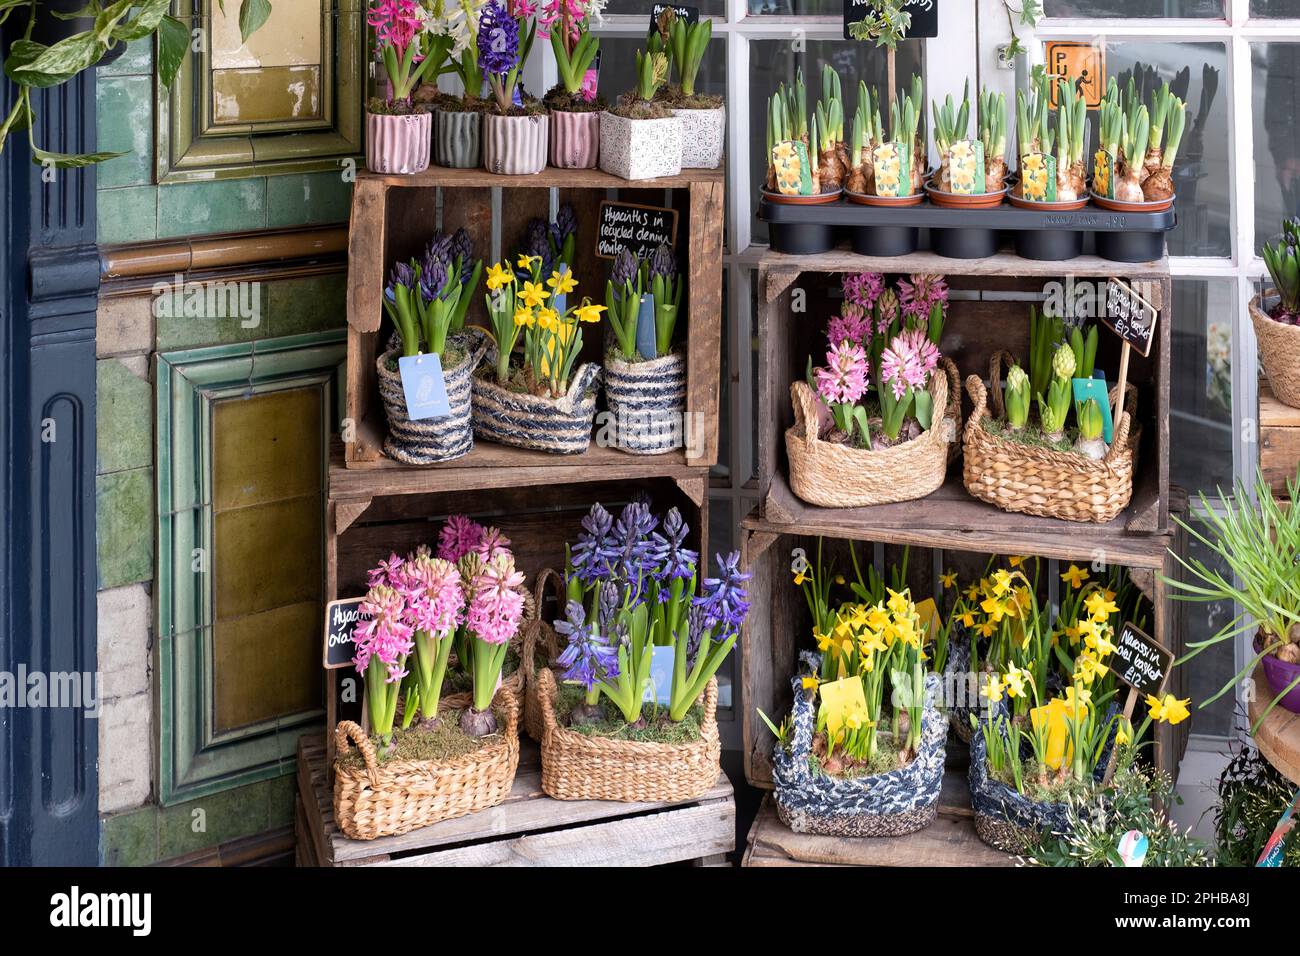 A display of spring bulbs and flowers outside a florist shop in Bristol, UK. The flowers including daffodils and hyacinths are presented in baskets Stock Photo